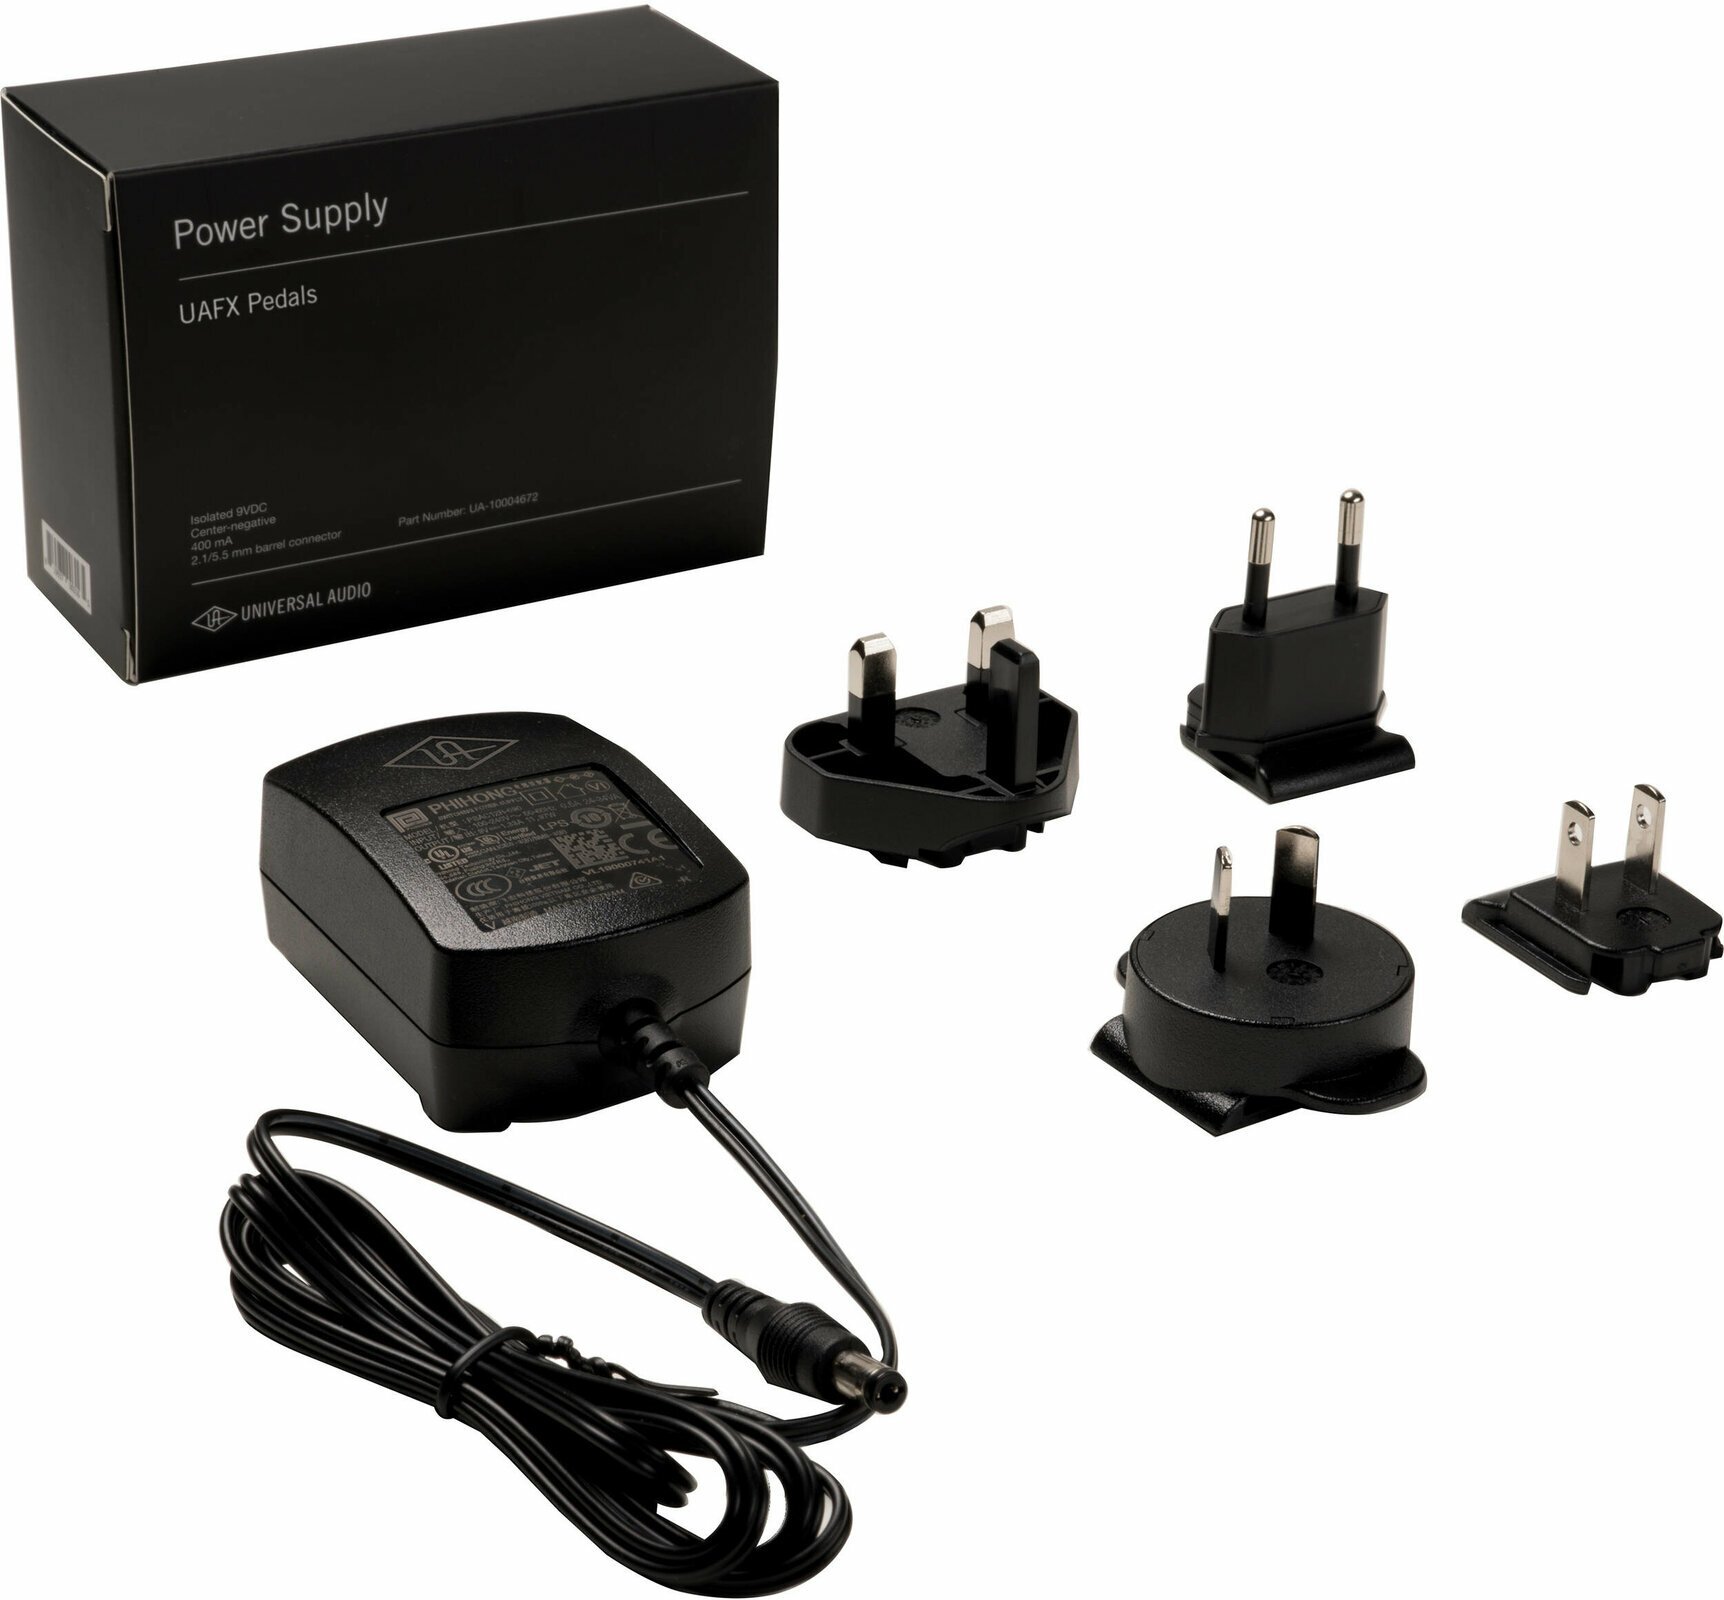 Power Supply Adapter Universal Audio UAFX Power Supply for UAFX Pedals